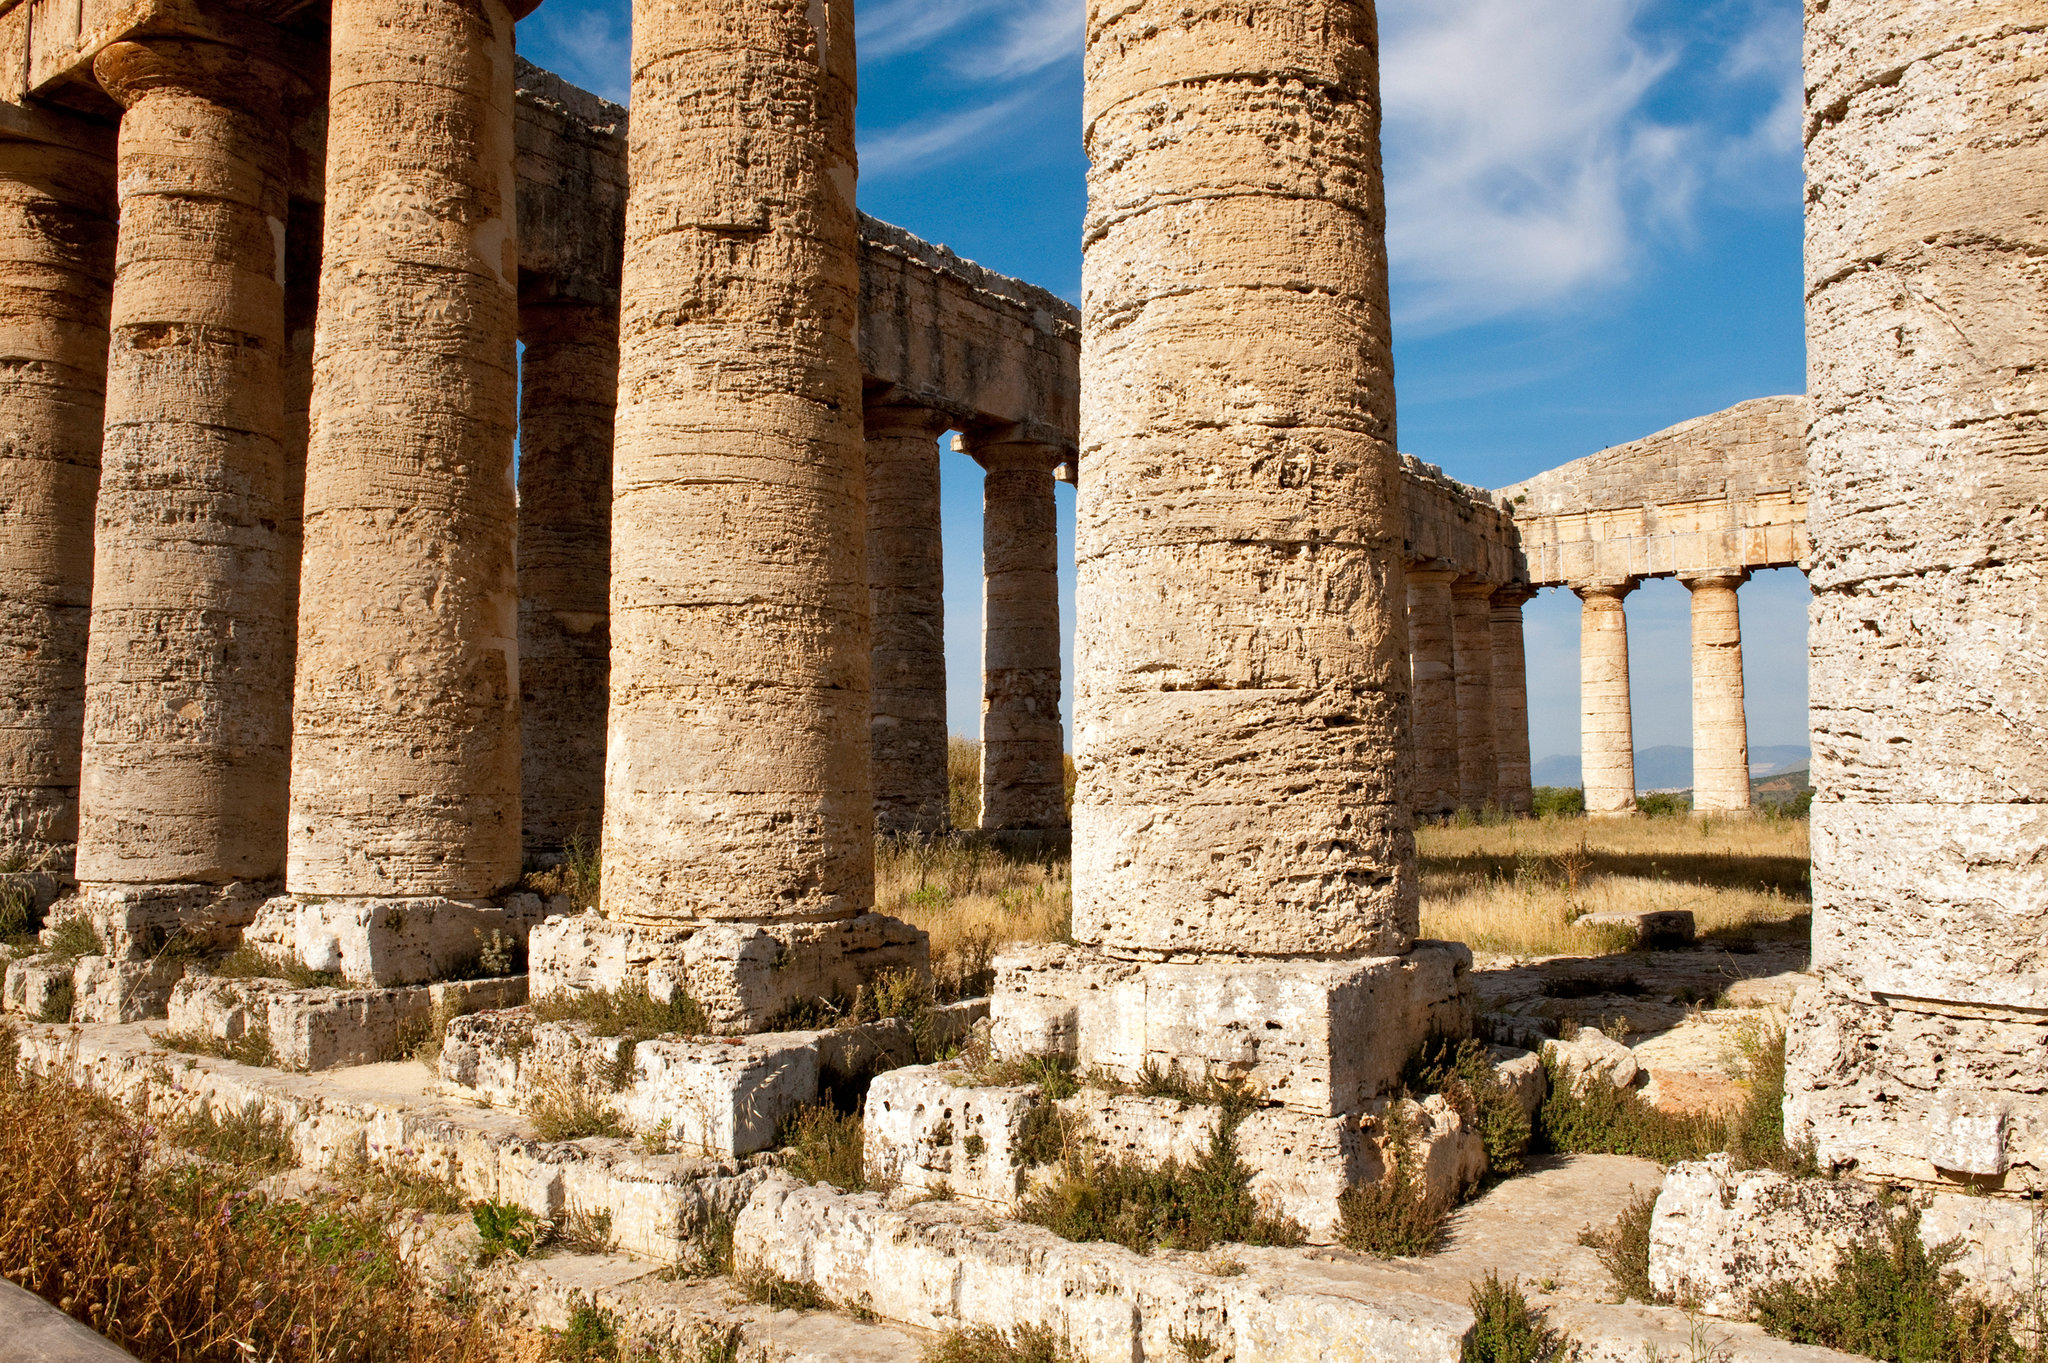 An unfinished Doric temple in Segesta, one of three major Greek temples in Sicily.